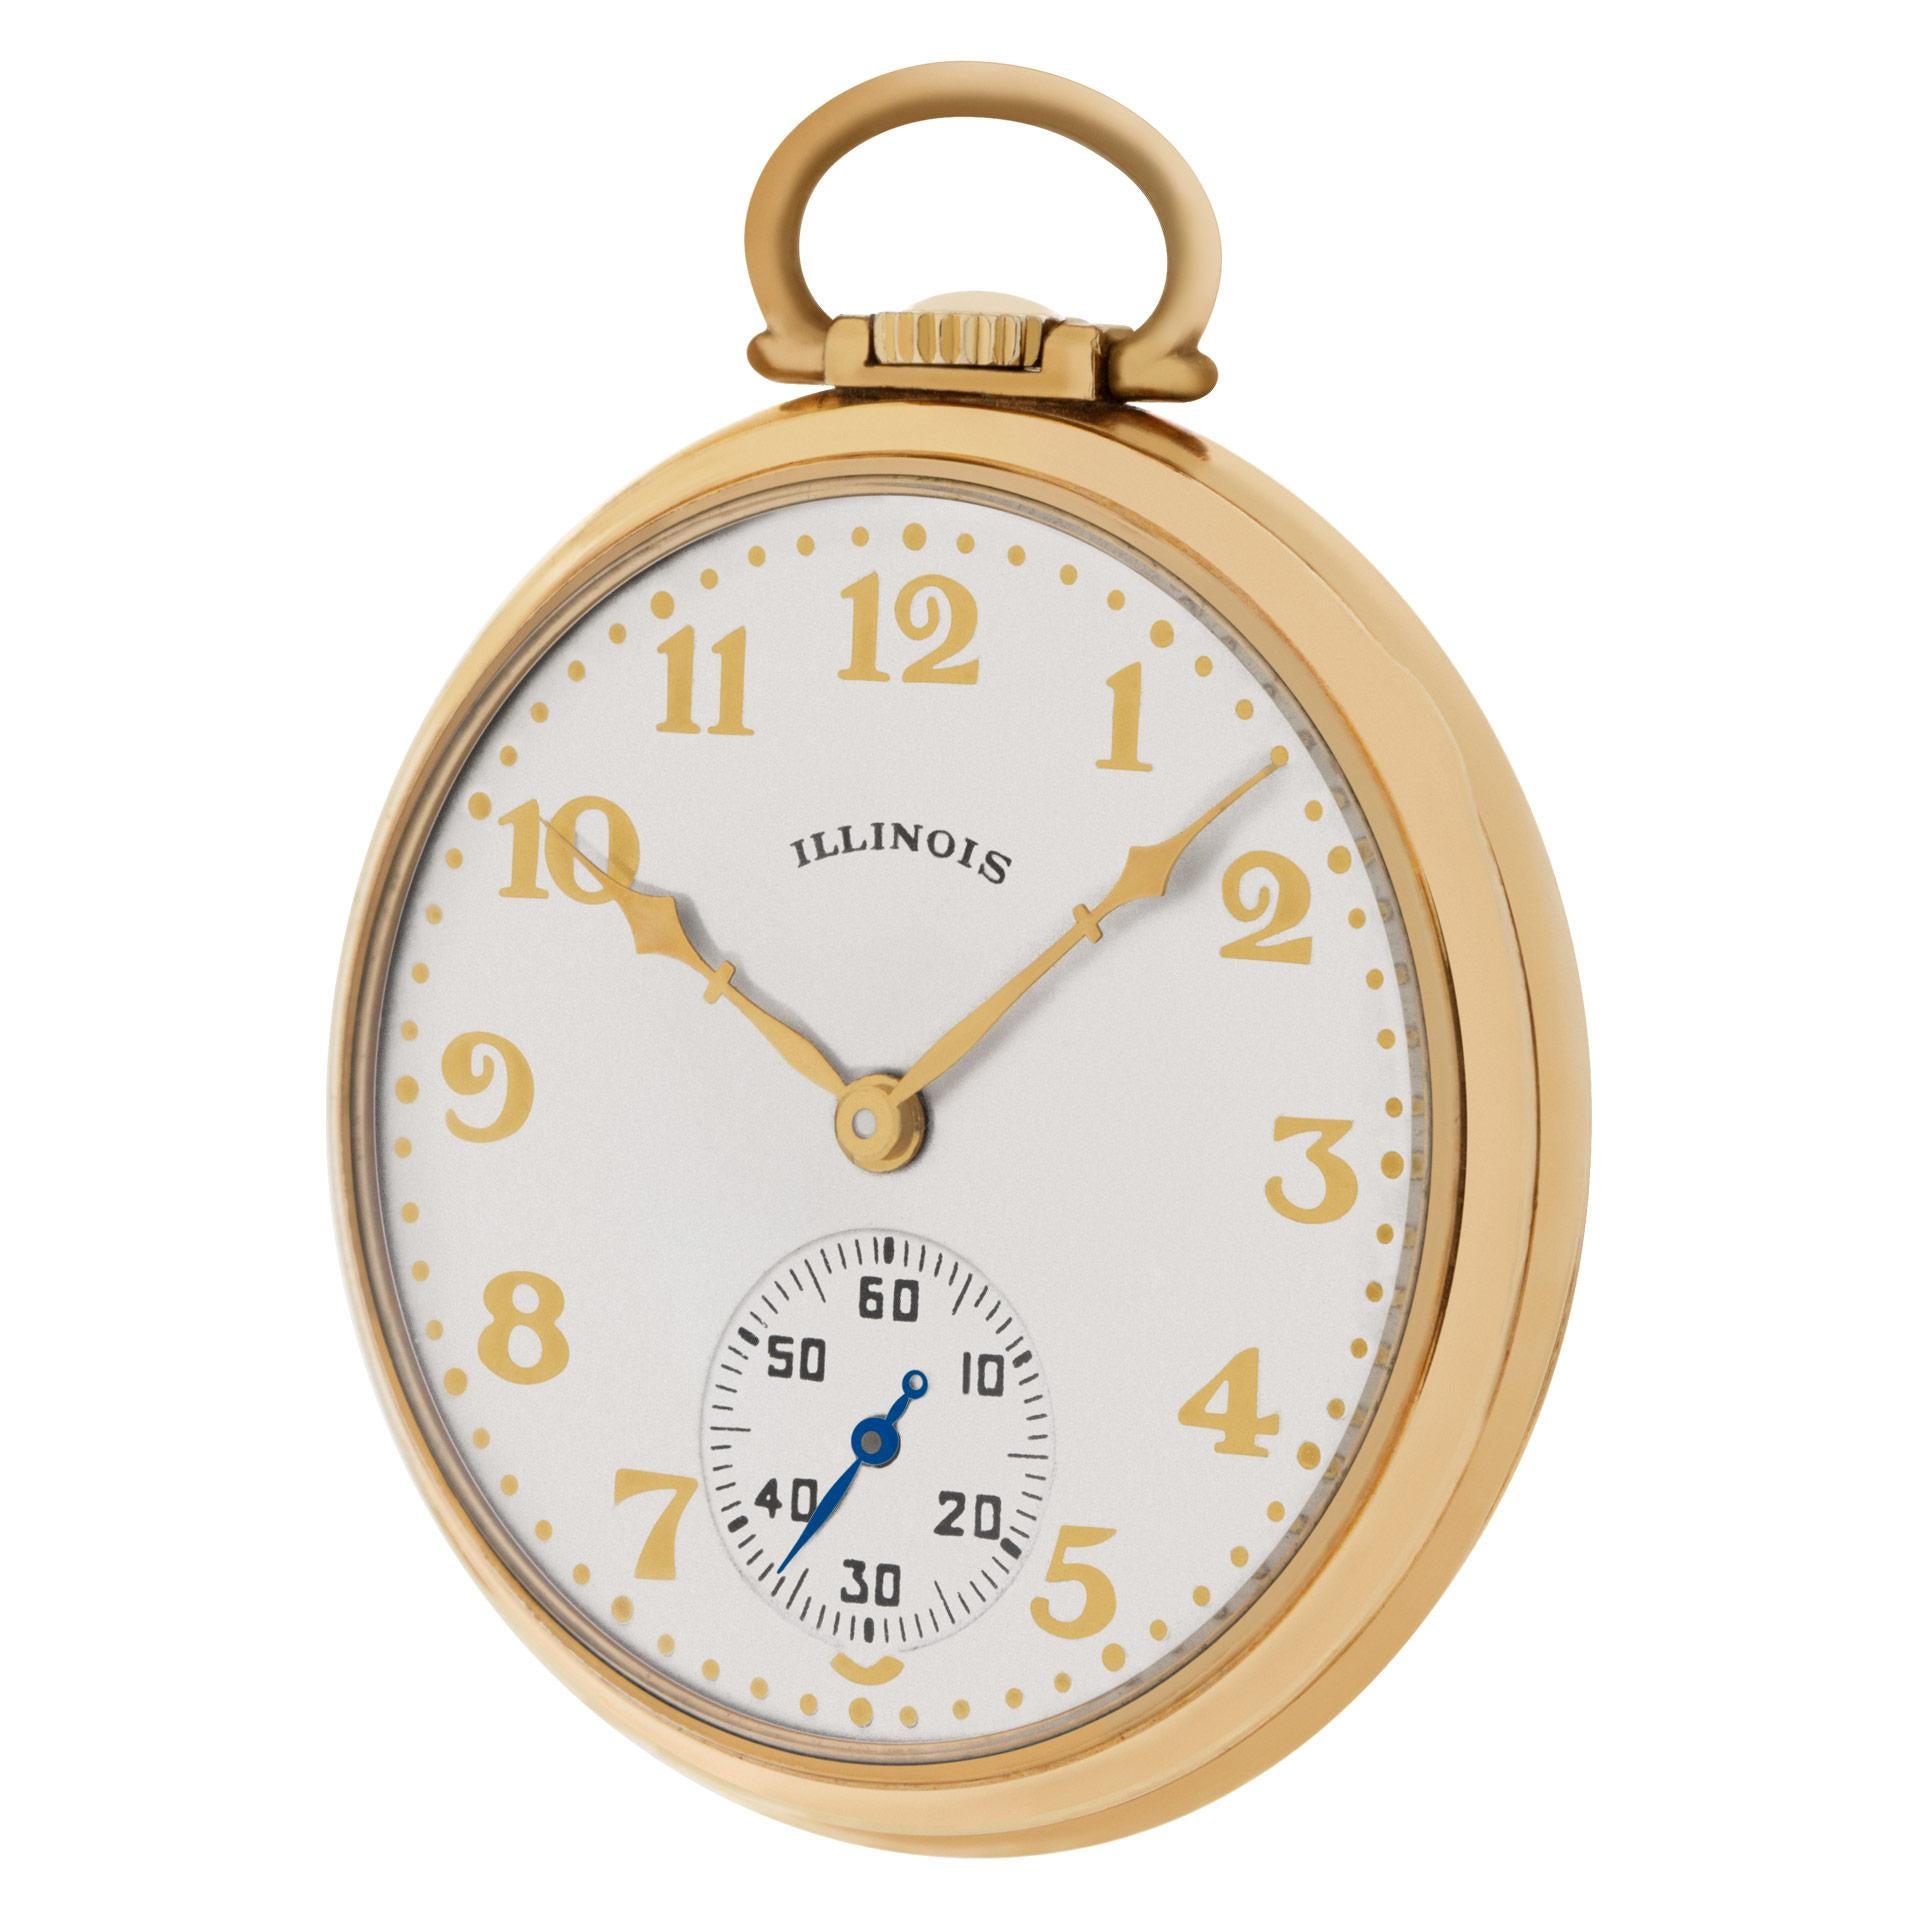 Gents Illinois pocket watch in 10k. Manual. Ref 4742166. Fine Pre-owned Illinois Watch.

Certified preowned Vintage Illinois pocket watch watch. This Illinois watch has a 43.2 mm case with a Round caseback and Ivory Number dial. It is Certified